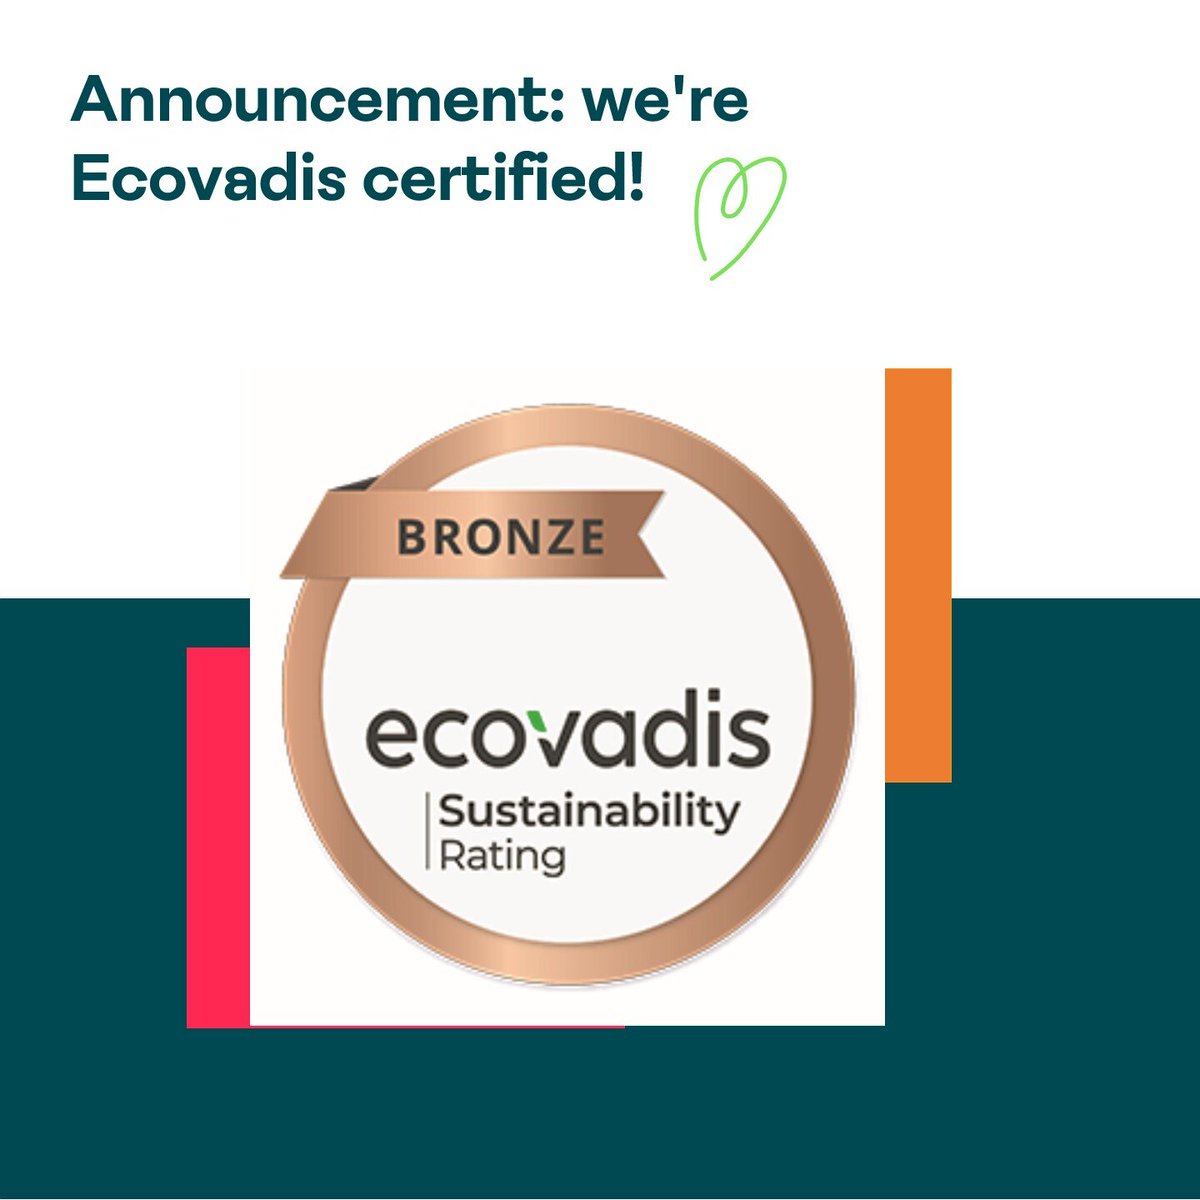 🚨Announcement!🚨 We're delighted to be Ecovadis certified! While we have maintained our Bronze Sustainability Rating, we're thrilled to have made changes within our positioning. We now rank ahead of 81% of companies rated by Ecovadis! #dowhatmatters #regenerativesustainability